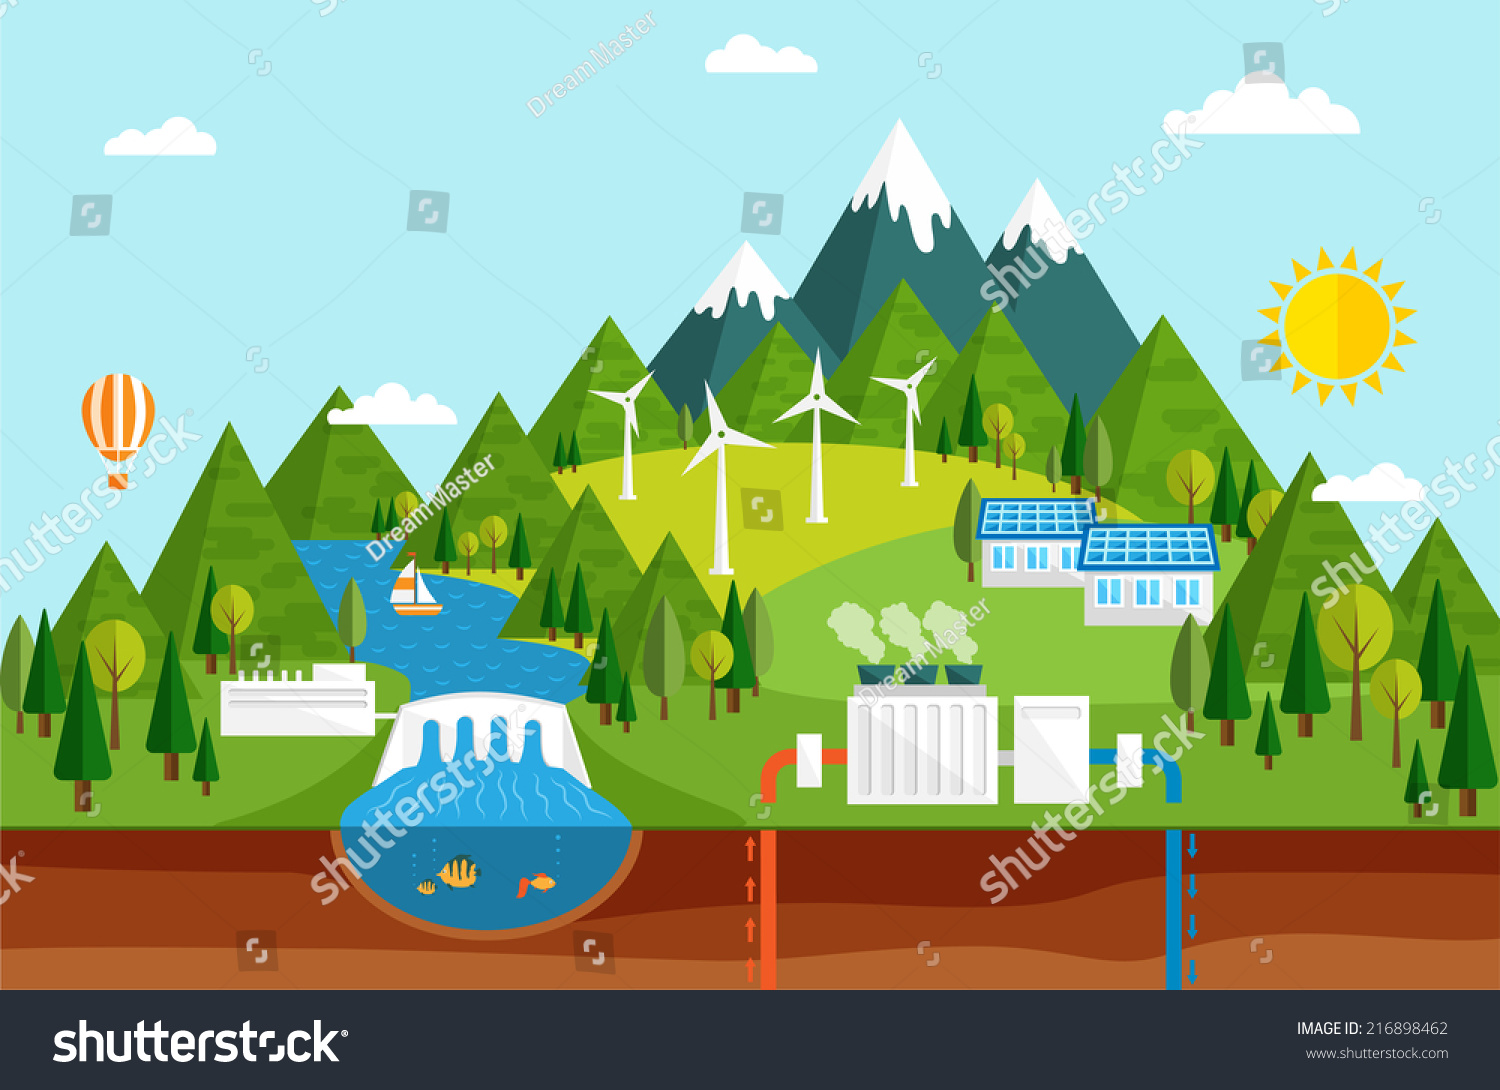 Renewable energy like hydro, solar, geothermal and wind power 